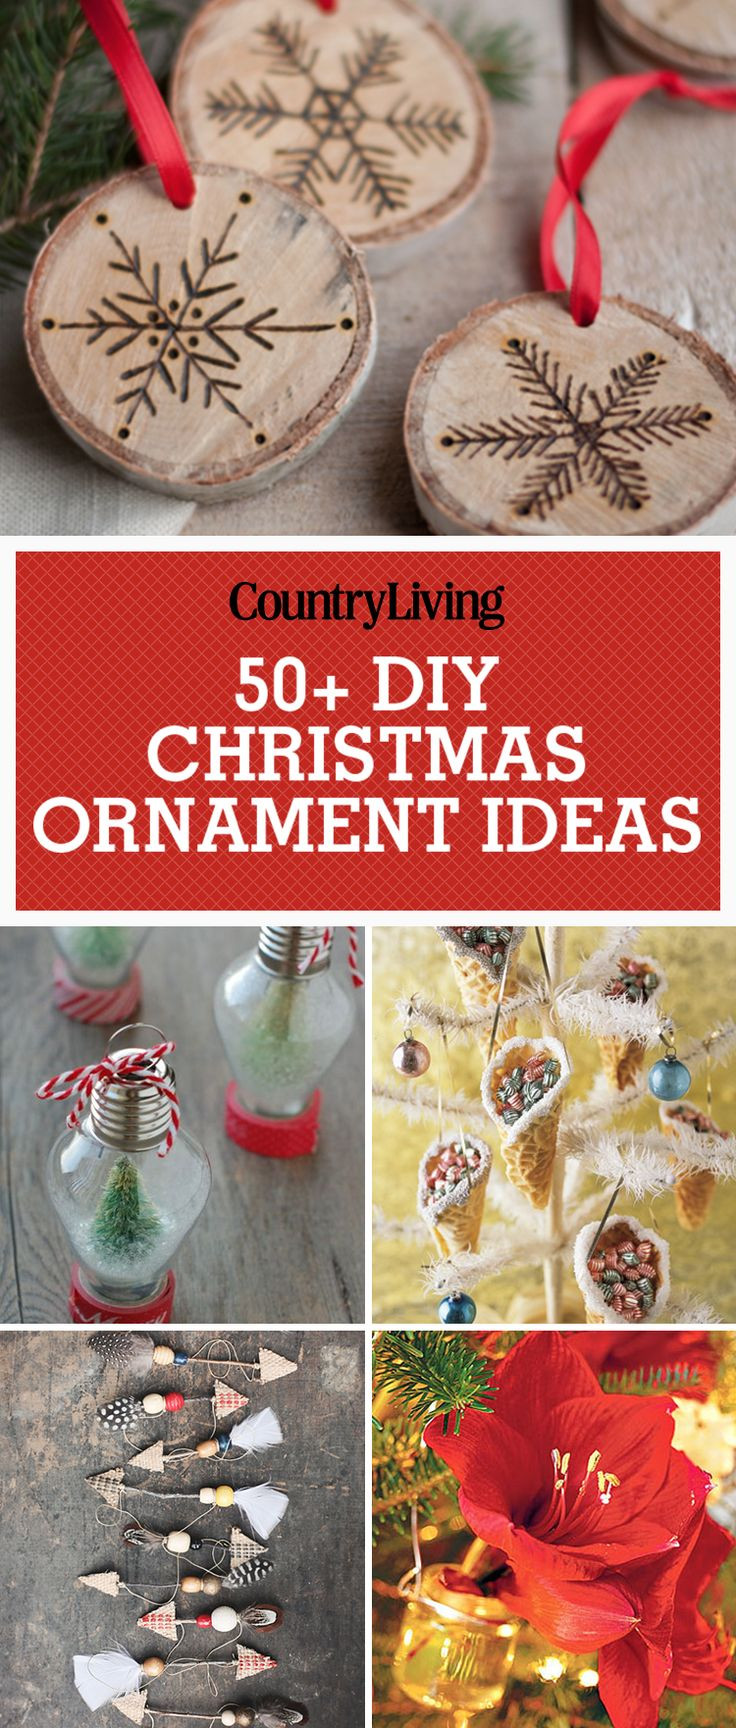 Christmas Ornament DIY
 17 Best images about Christmas Decorations & Crafts on